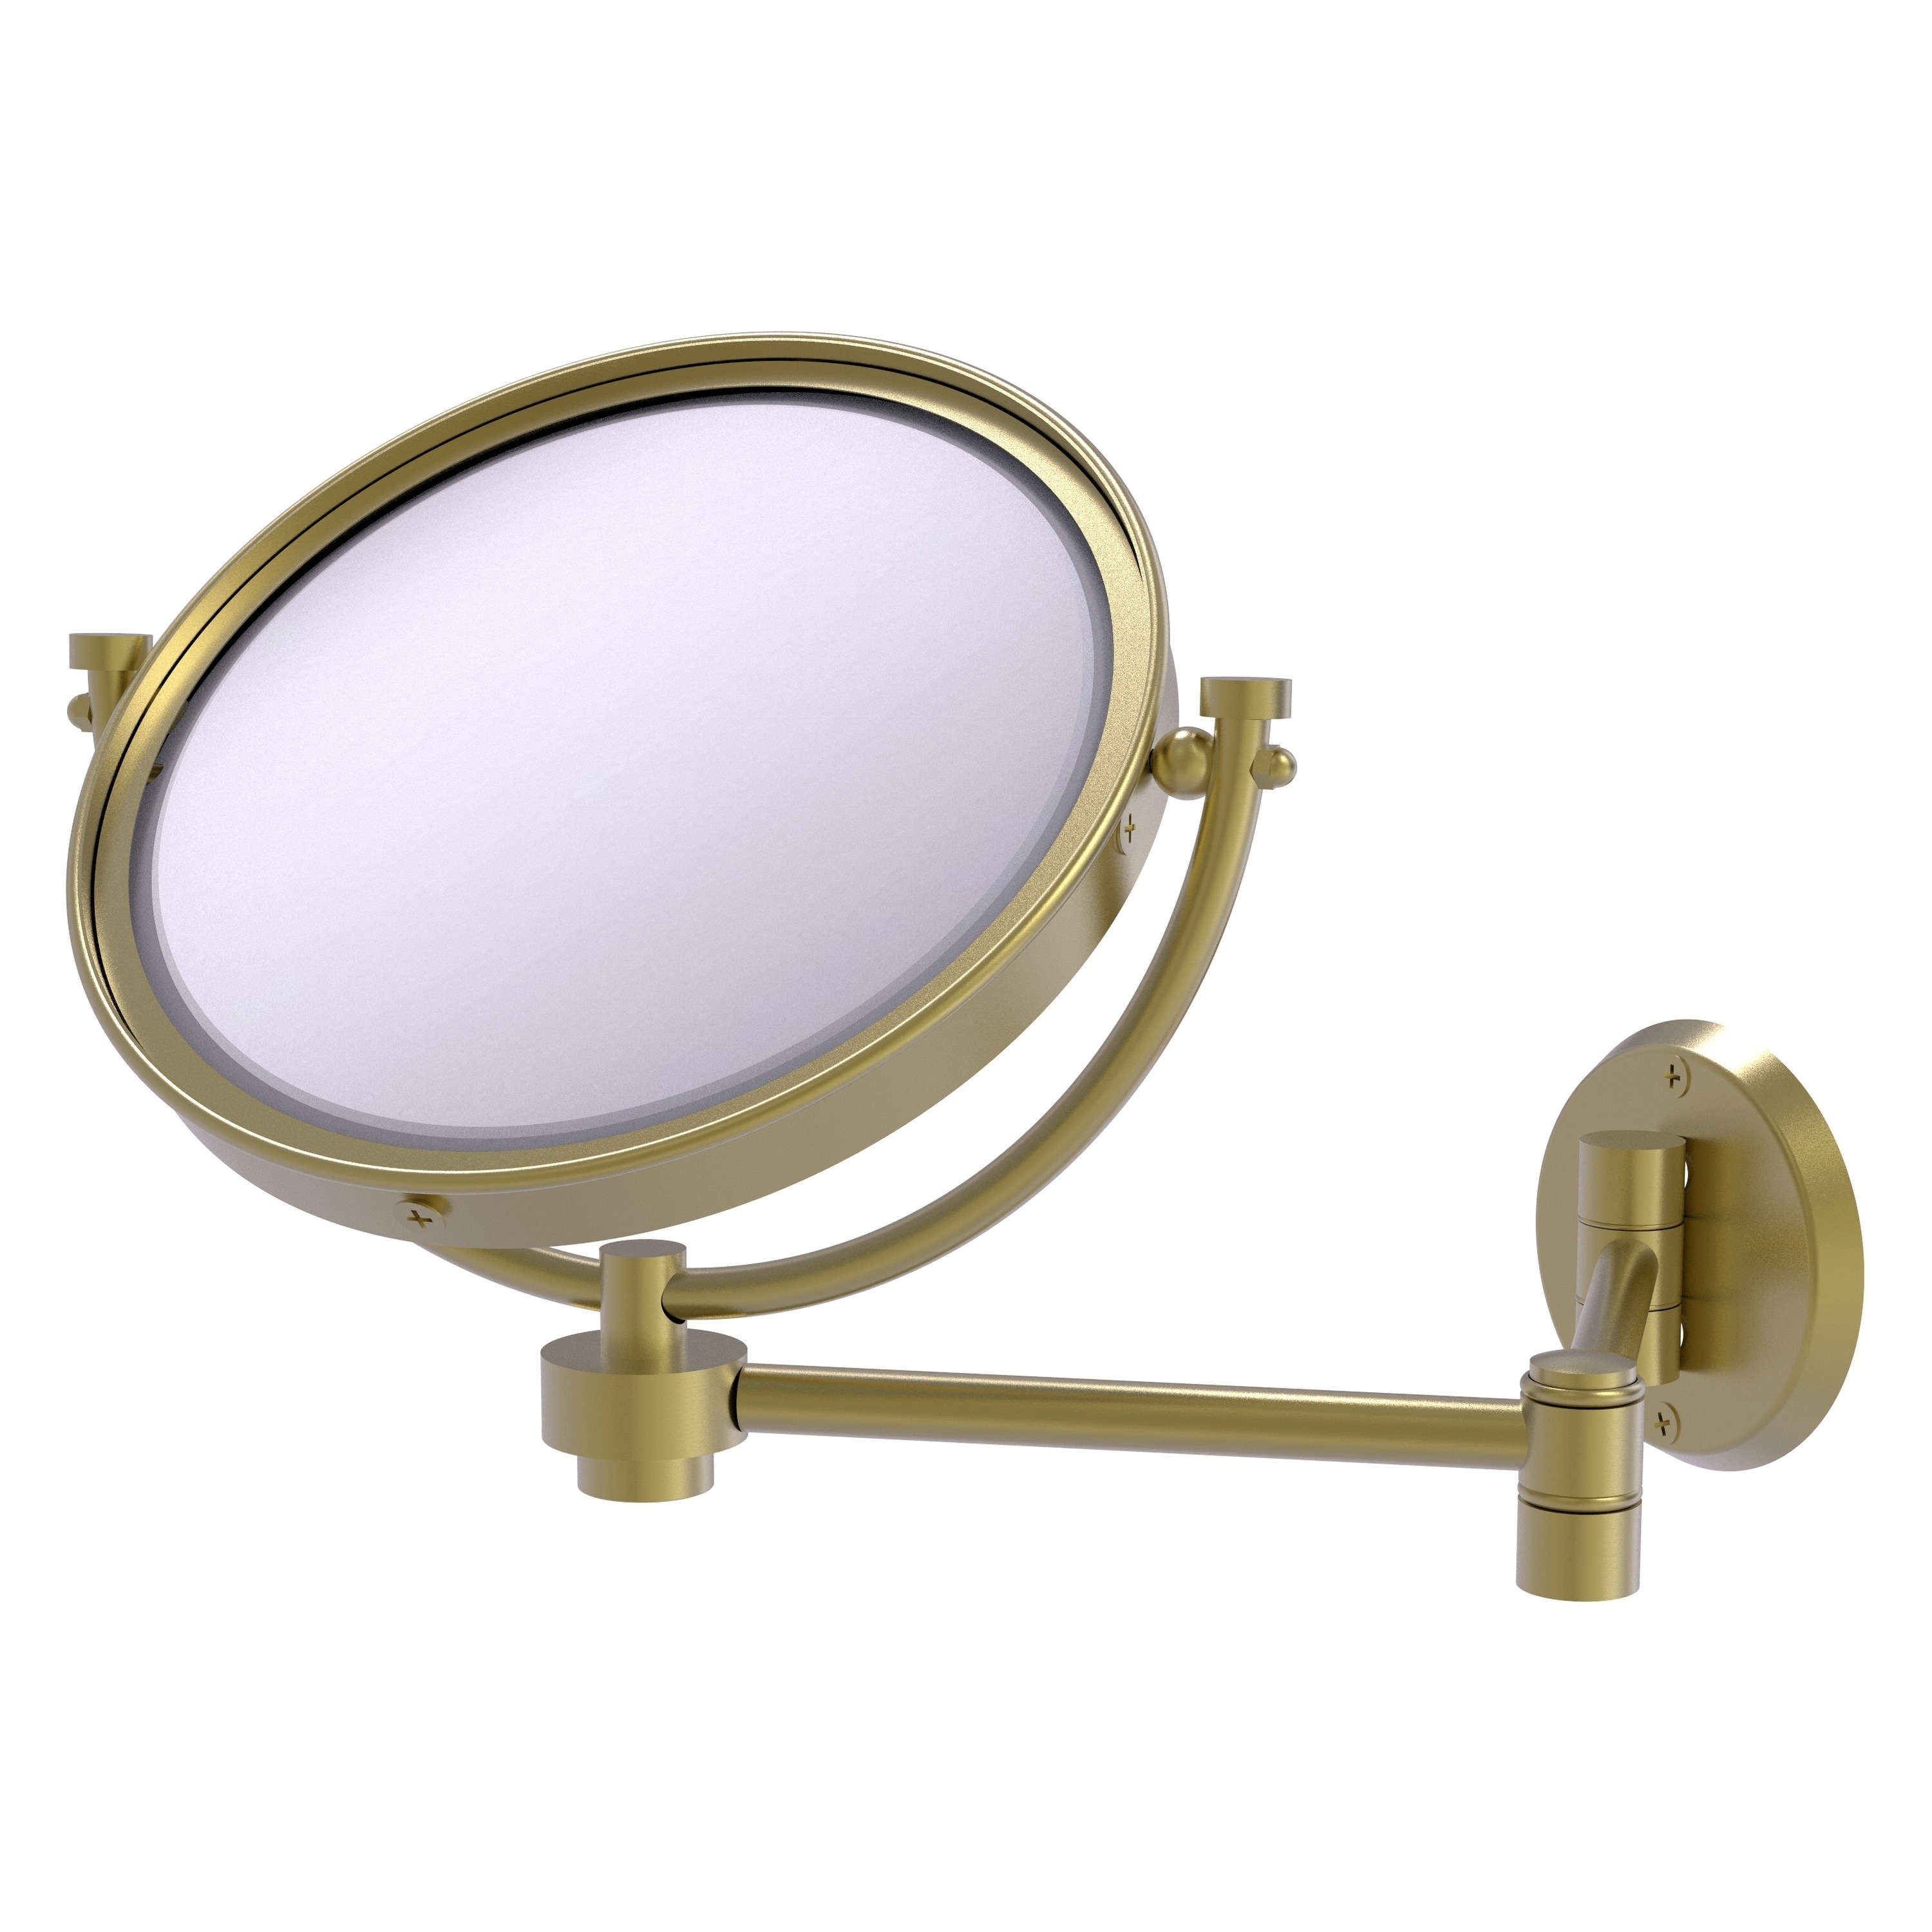 8-in x 10-in Satin Chrome Double-sided 5X Magnifying Wall-mounted Vanity Mirror | - Allied Brass WM-6/5X-SBR